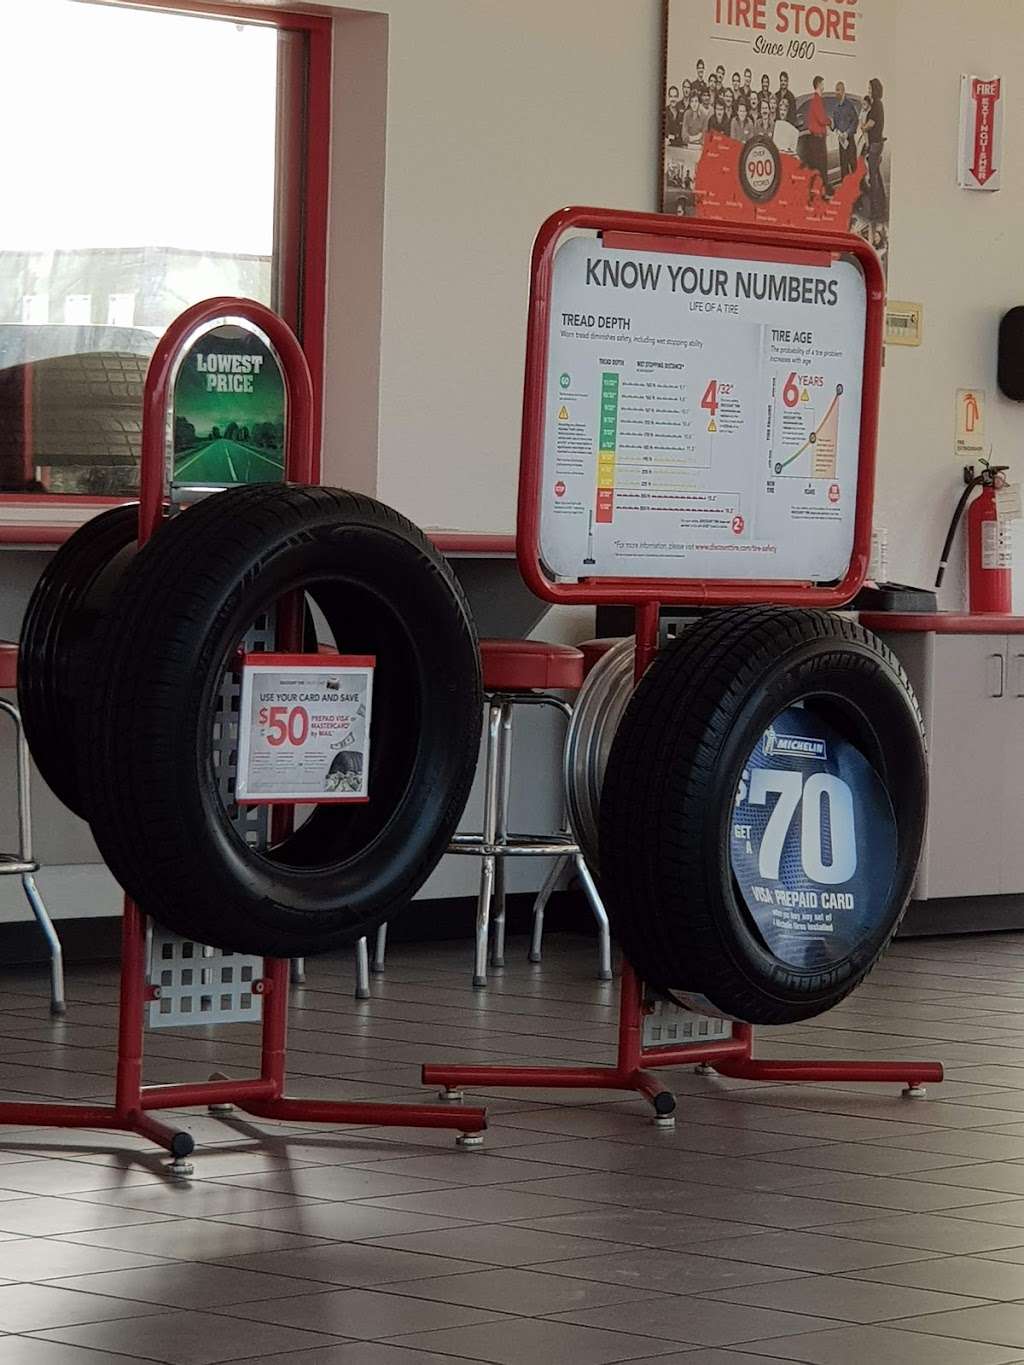 Discount Tire | 3516 W Airport Fwy, Irving, TX 75062 | Phone: (214) 596-1267